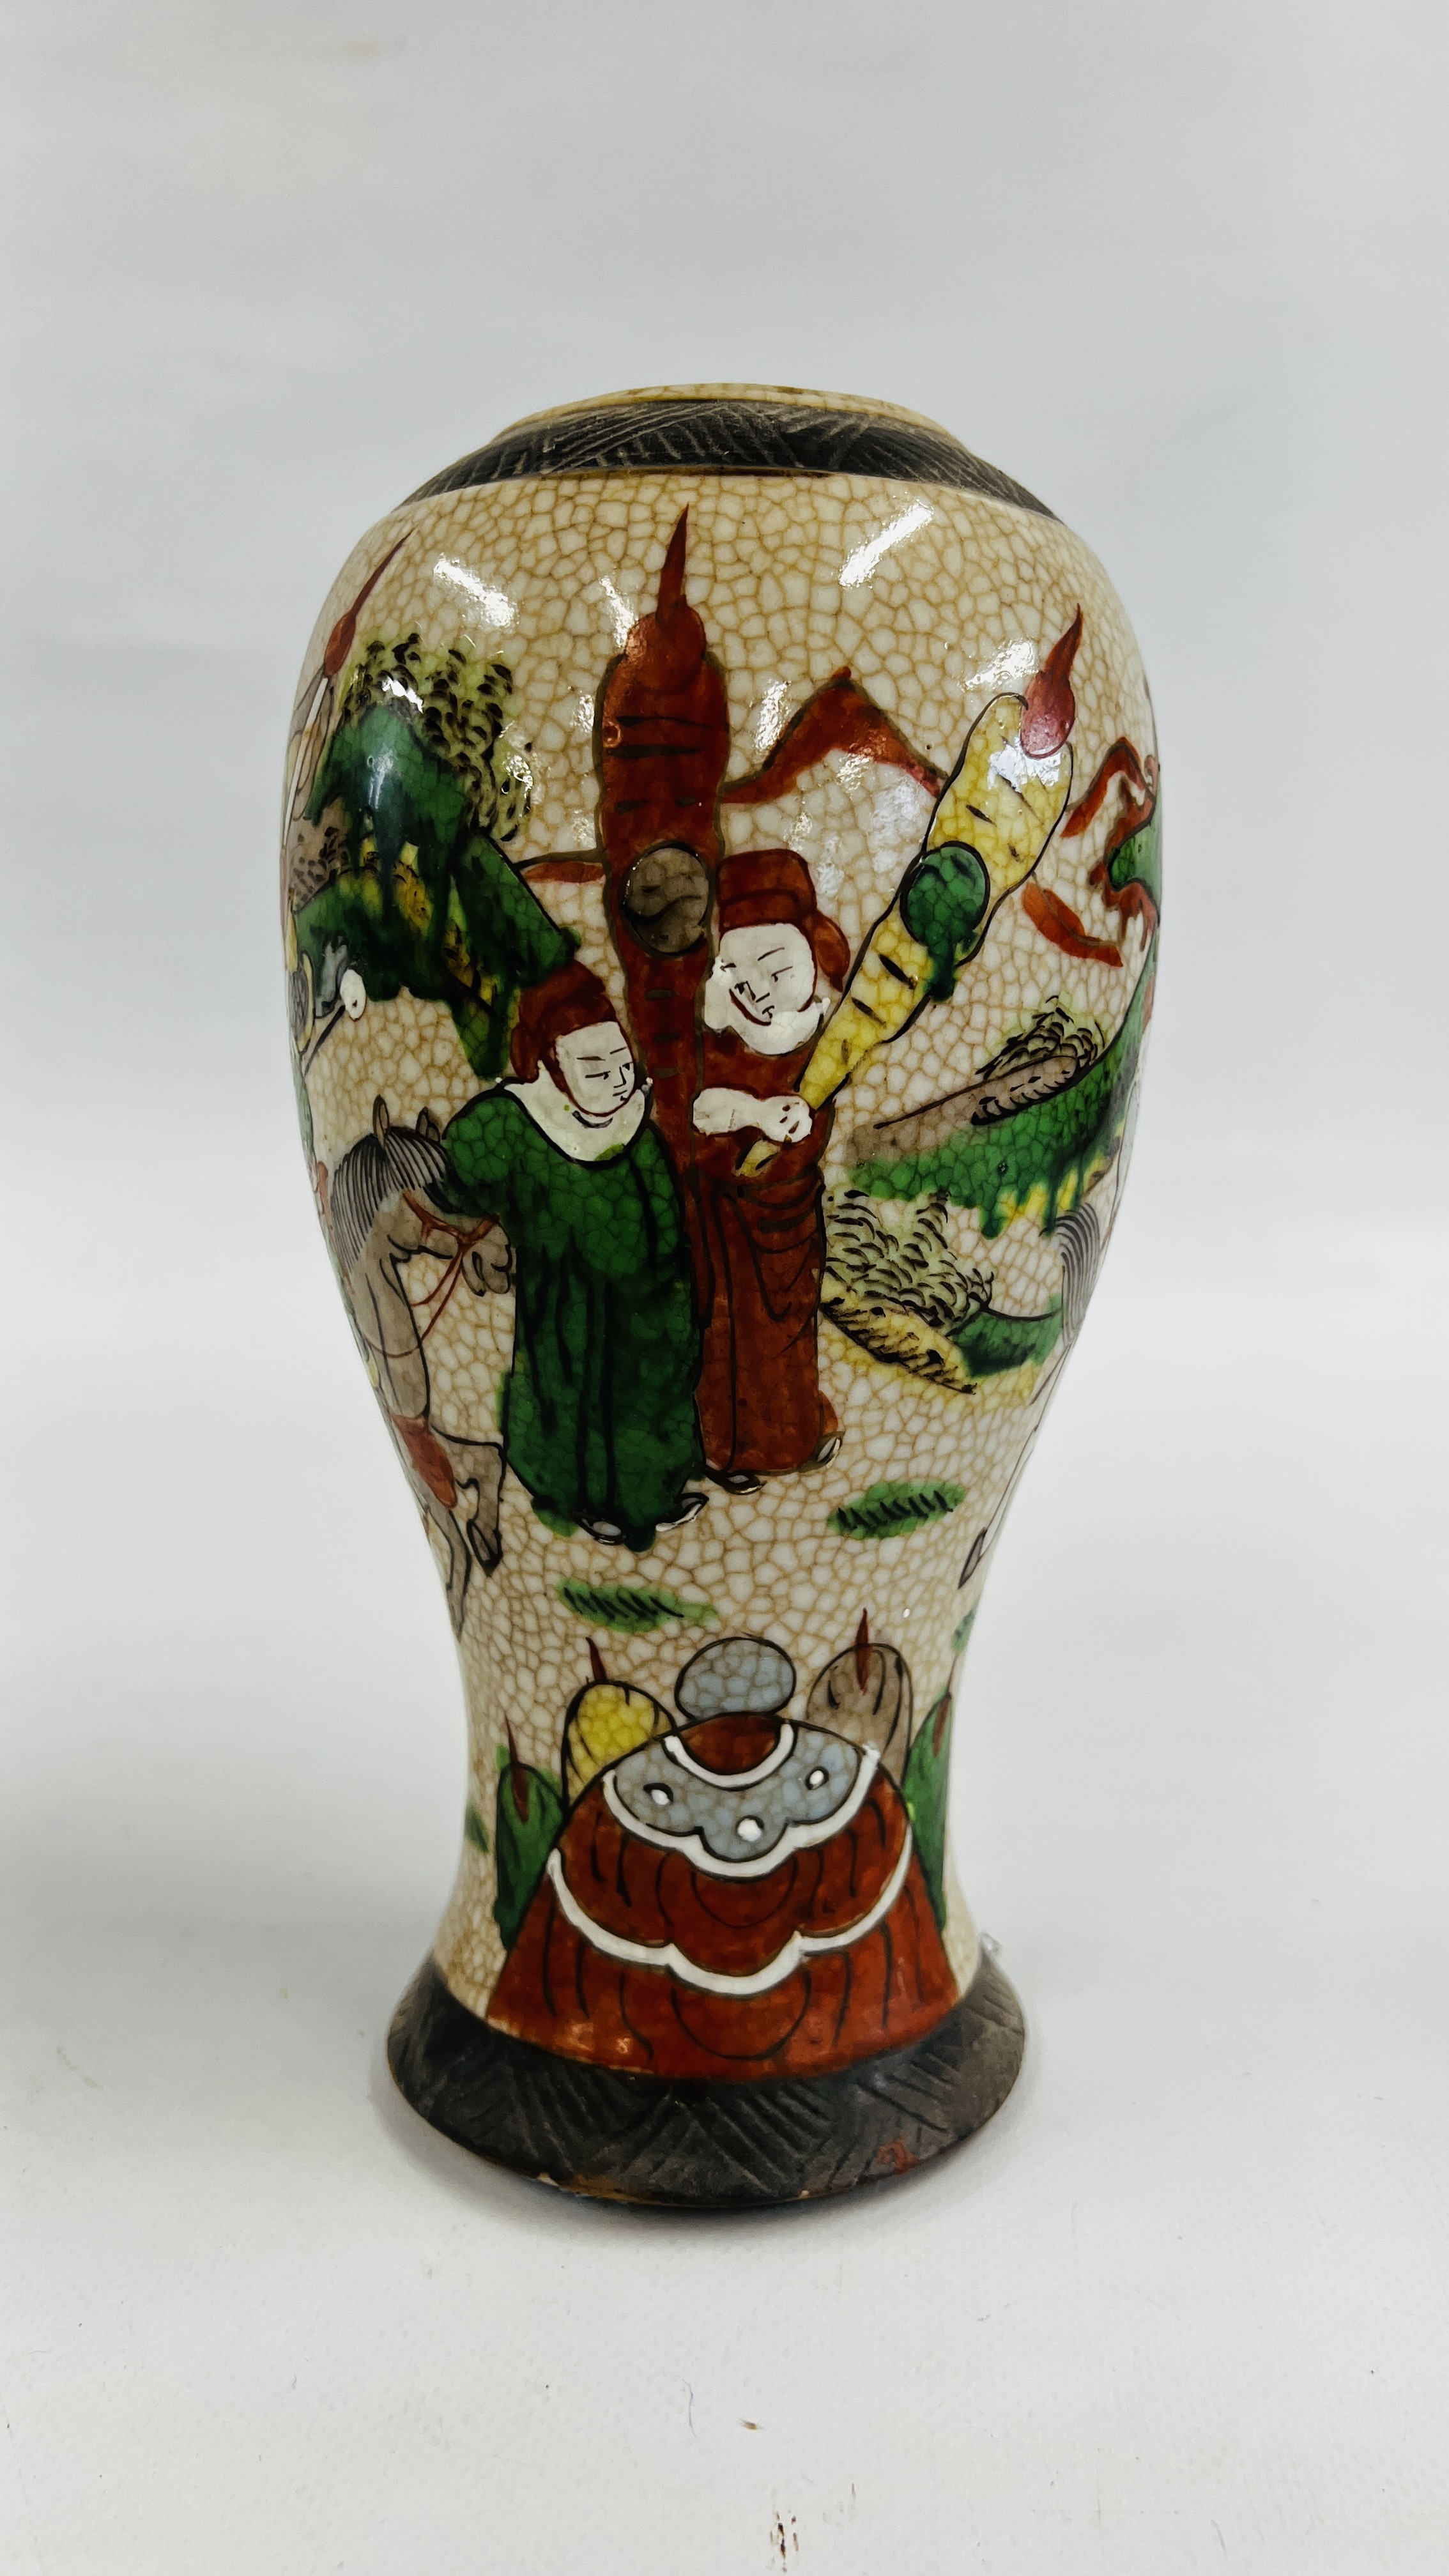 A CHINESE NANJING STYLE CRACKLED GLAZED VASE DECORATED WITH CHARACTERS AND WARRIORS UPON HORSEBACK - Image 4 of 7